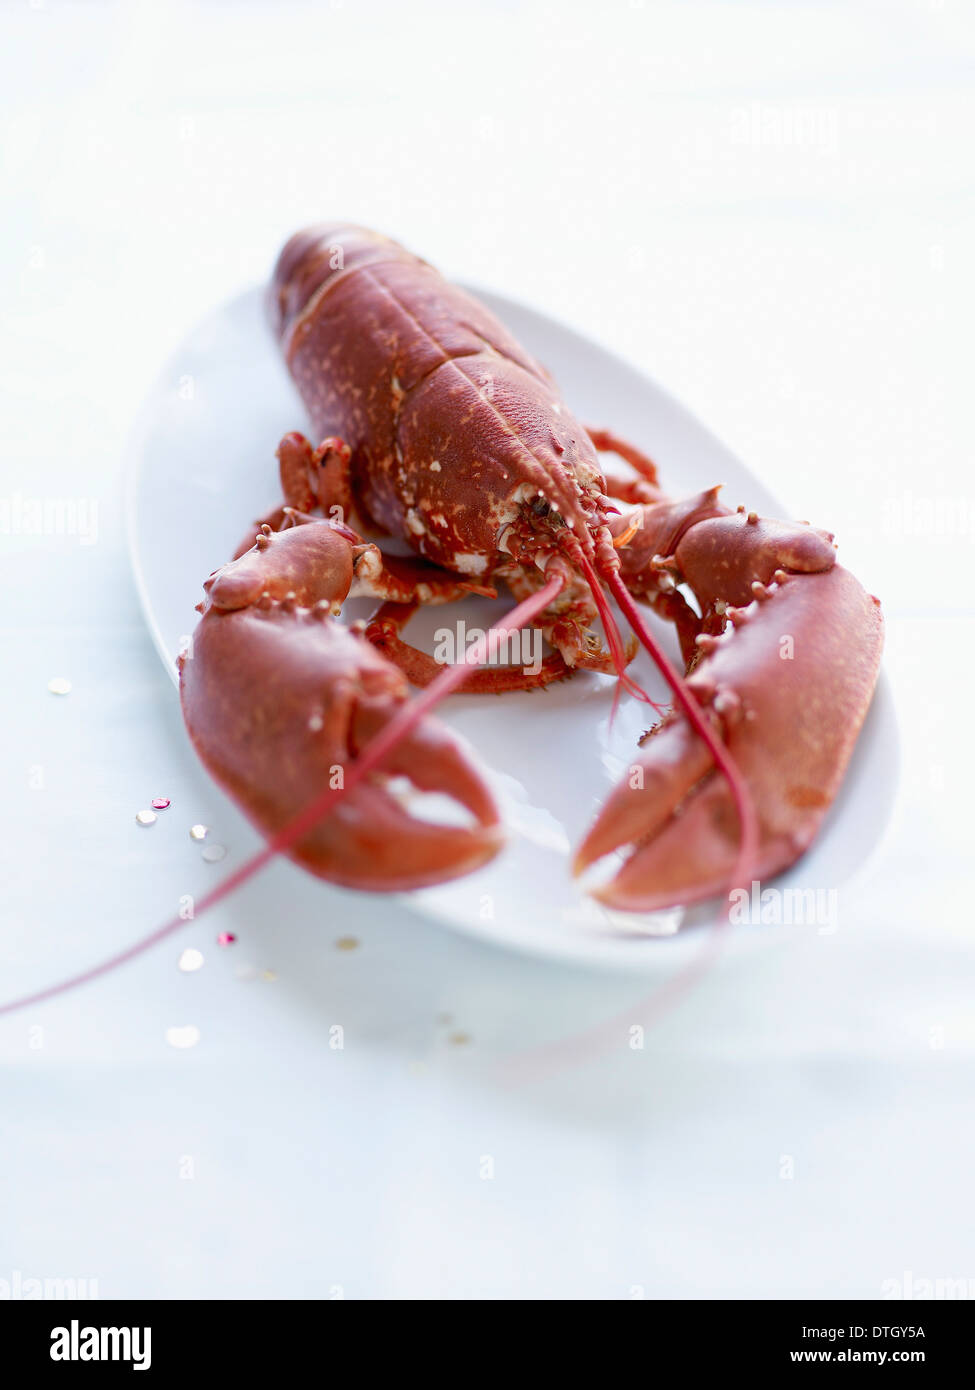 Whole cooked lobster Stock Photo